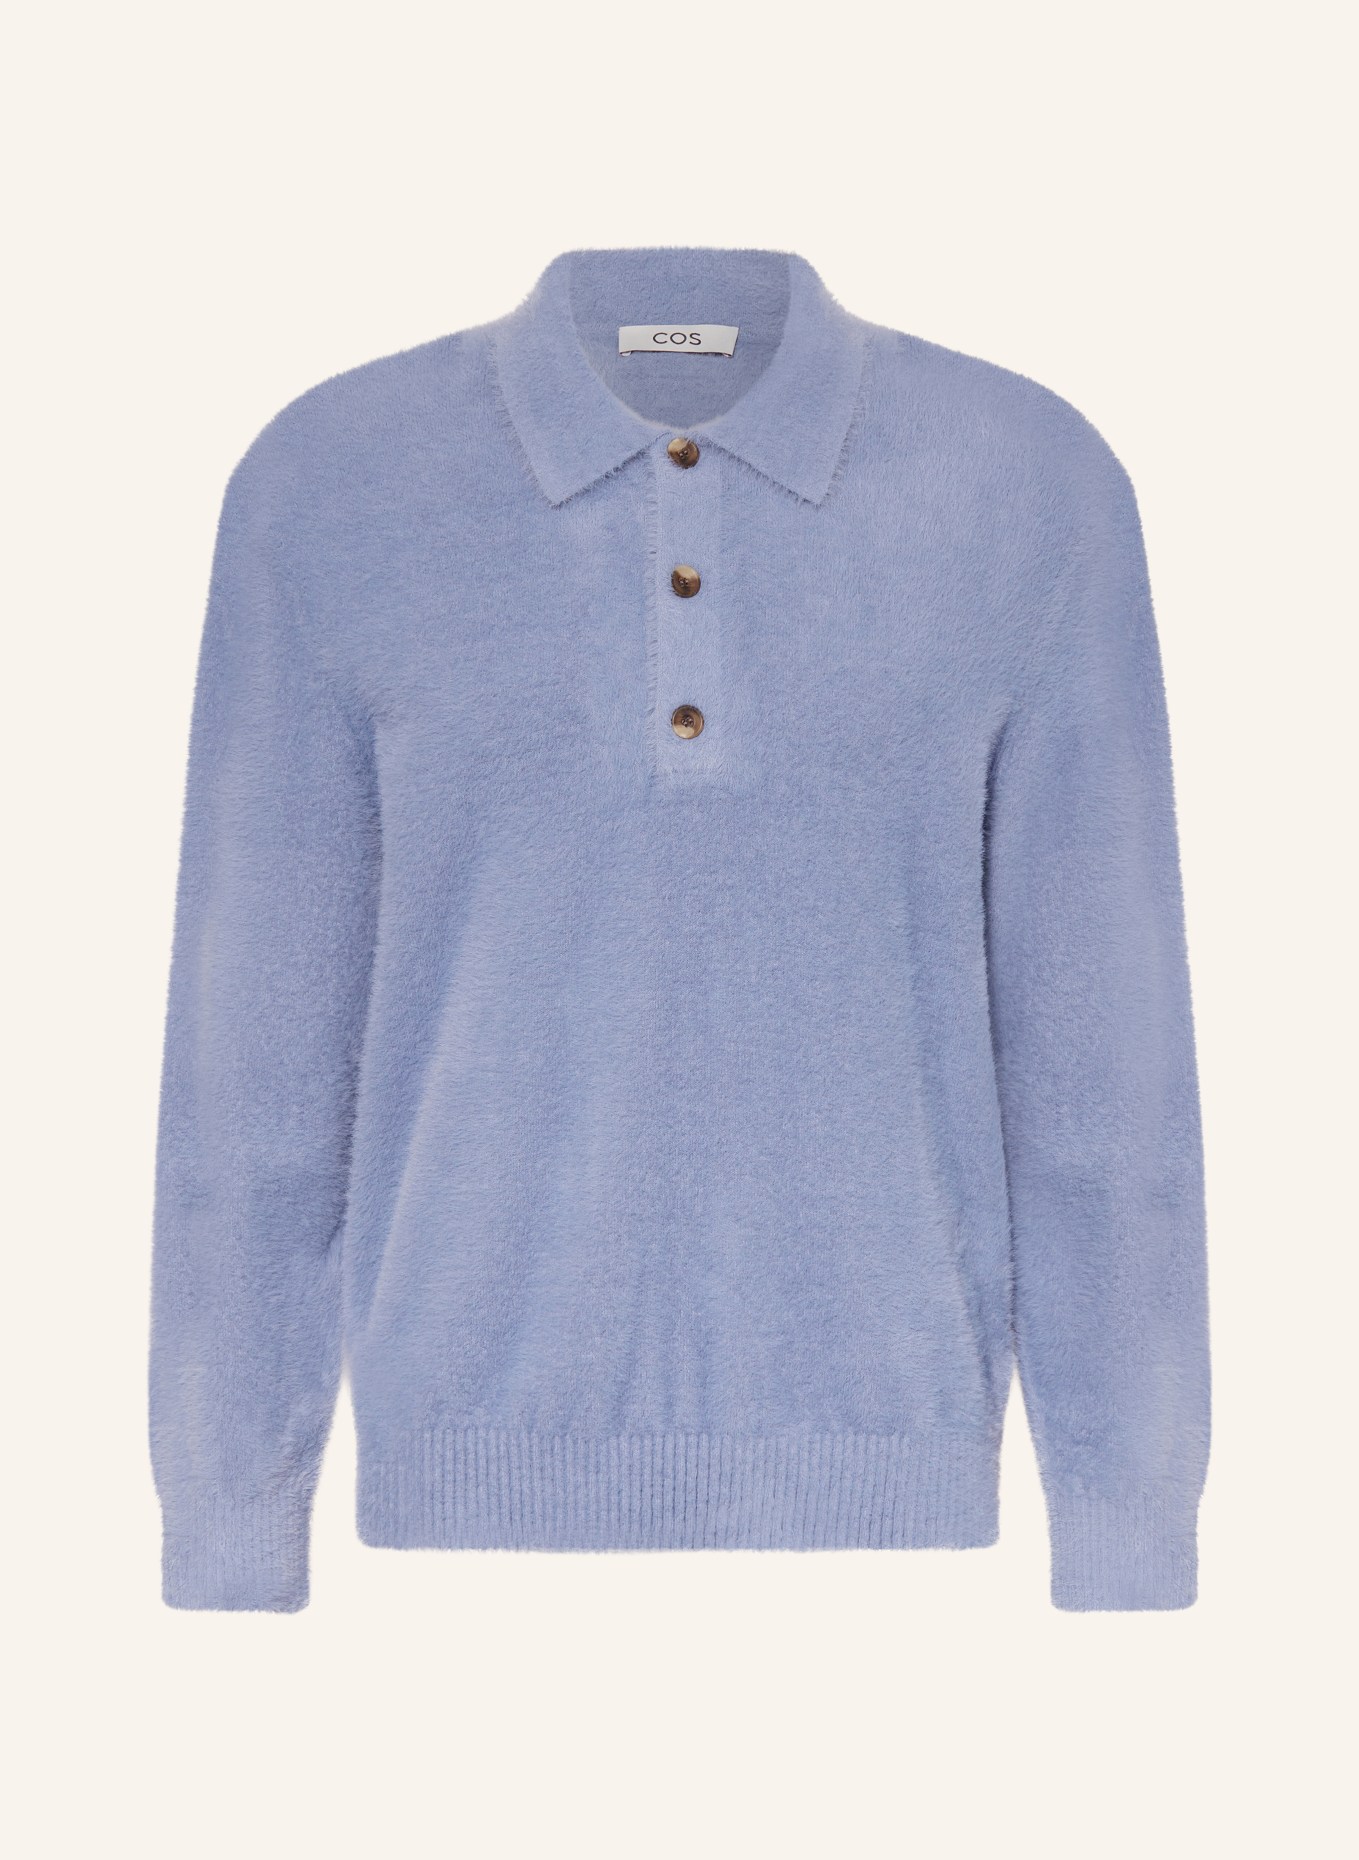 COS Knitted polo shirt relaxed fit, Color: BLUE (Image 1)